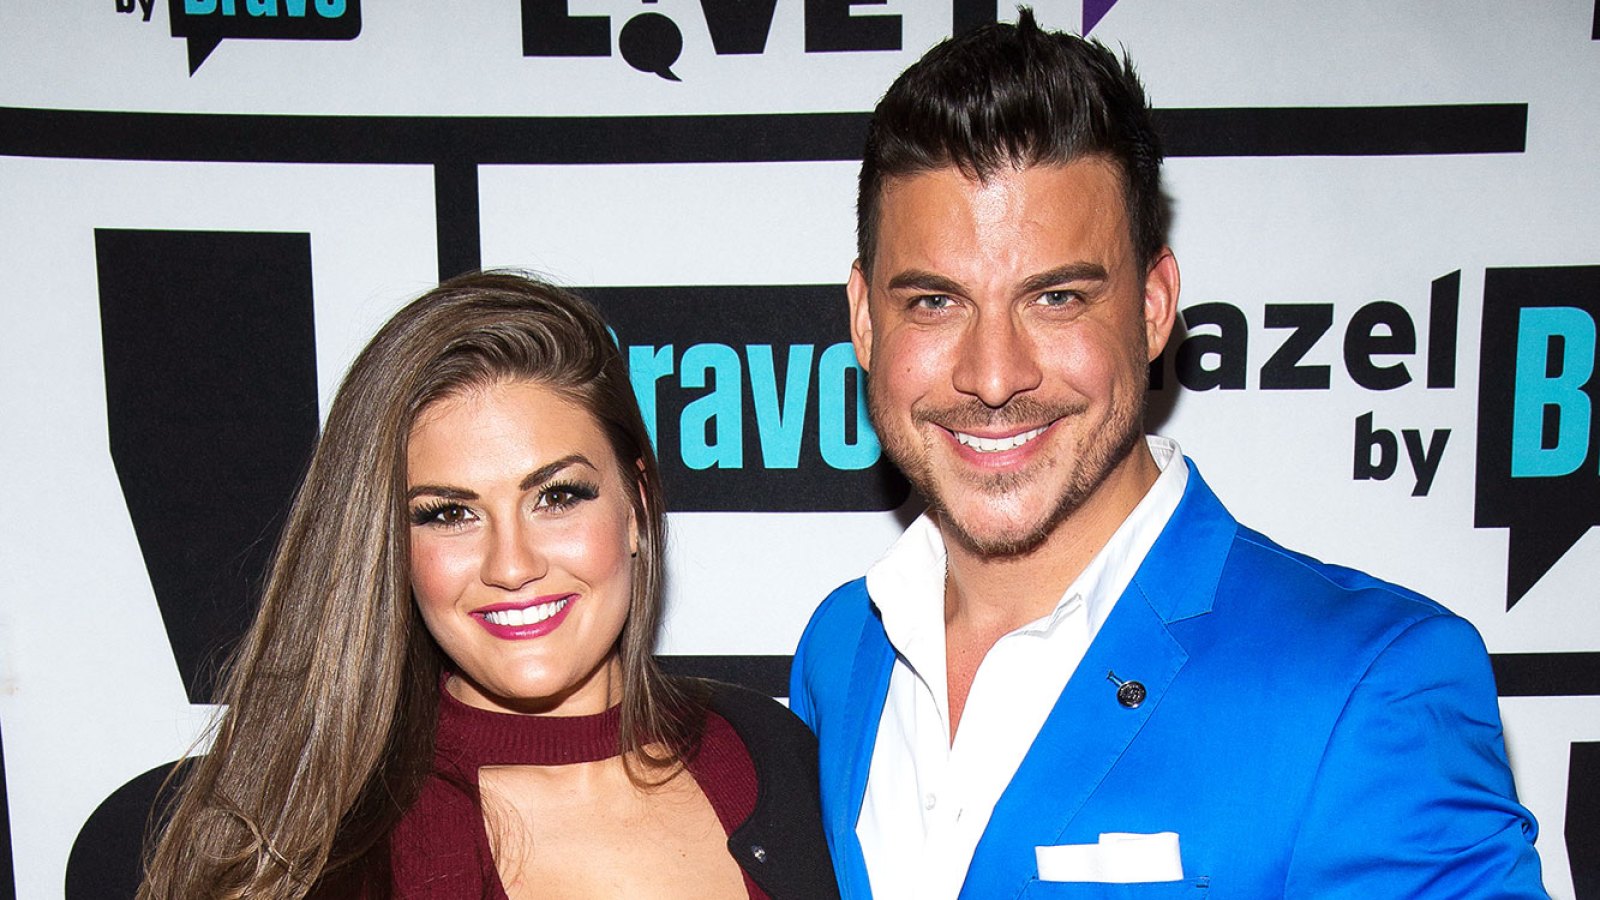 Brittany Cartwright Reveals If She and Jax Taylor Are Planning to Get a Prenup